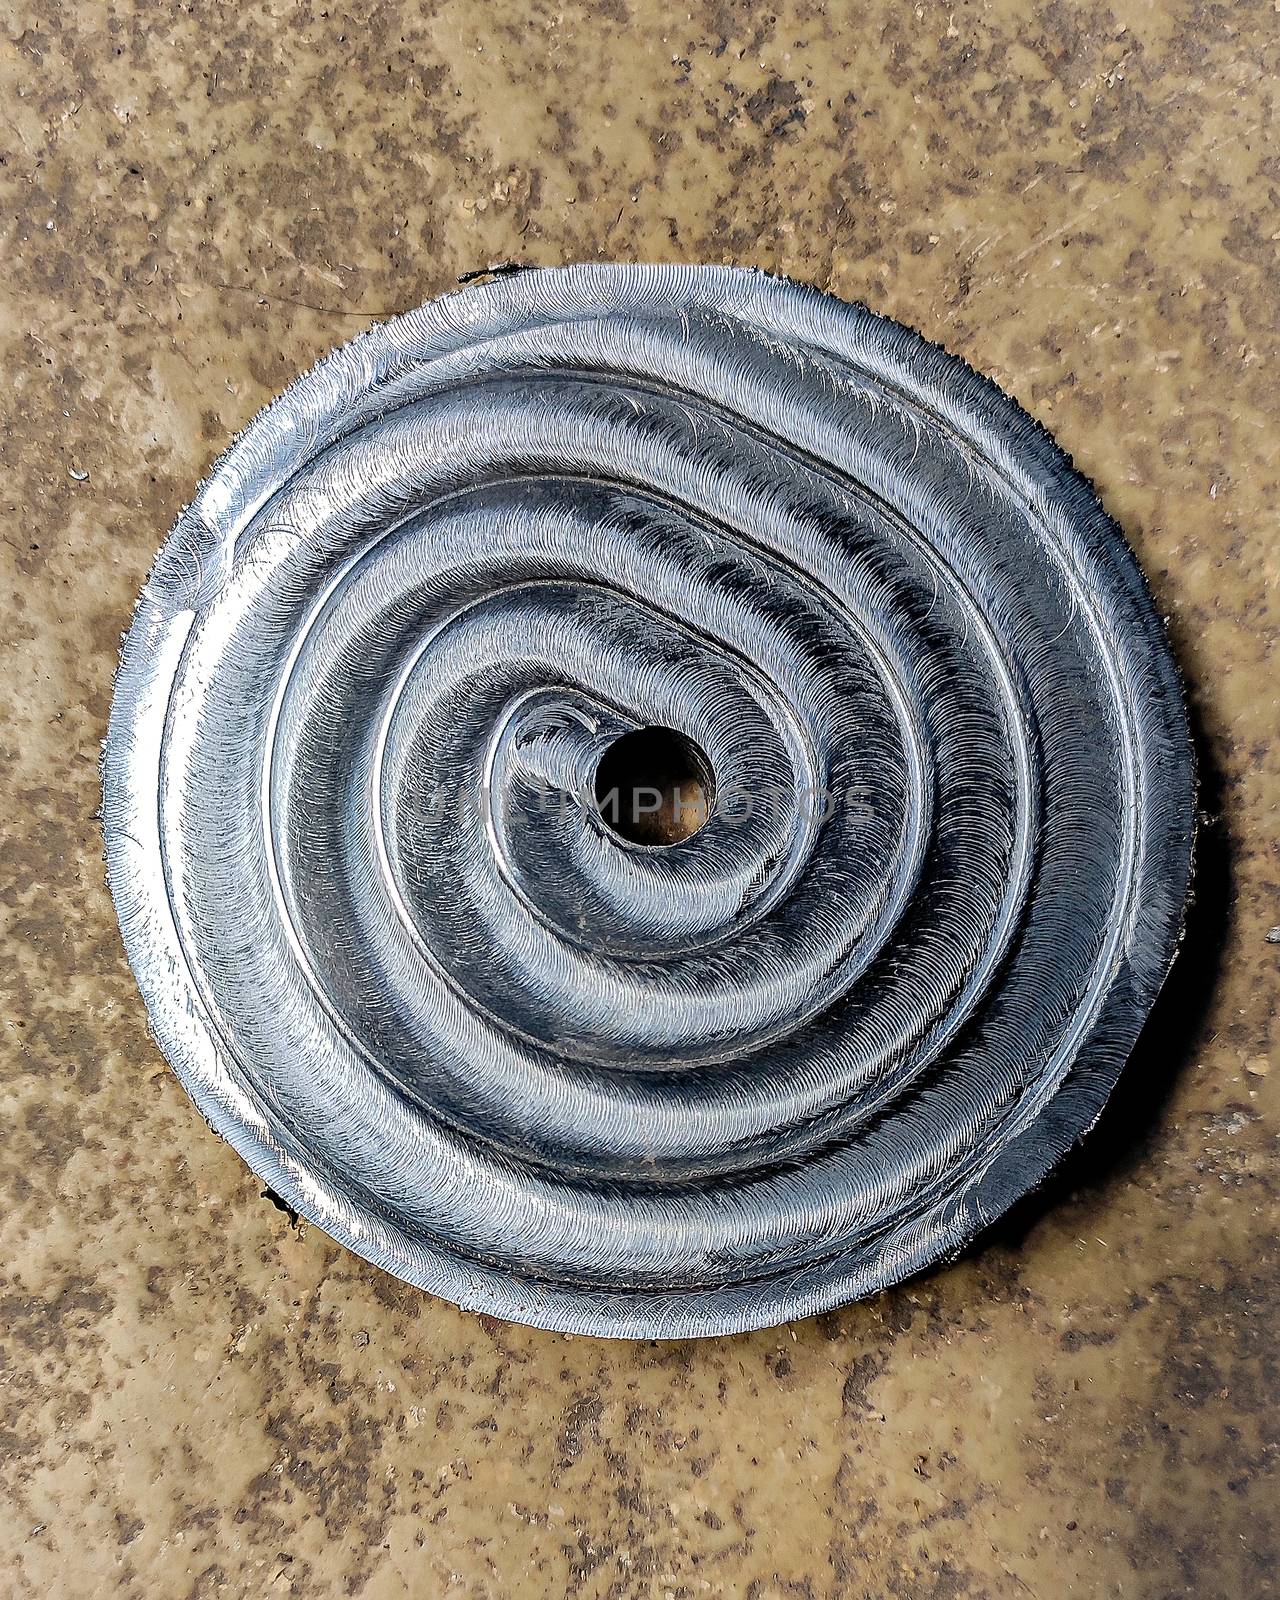 Selective focus, shallow depth of field image of Steel plate with nice spiral circular pattern formed as a result of CNC machining.